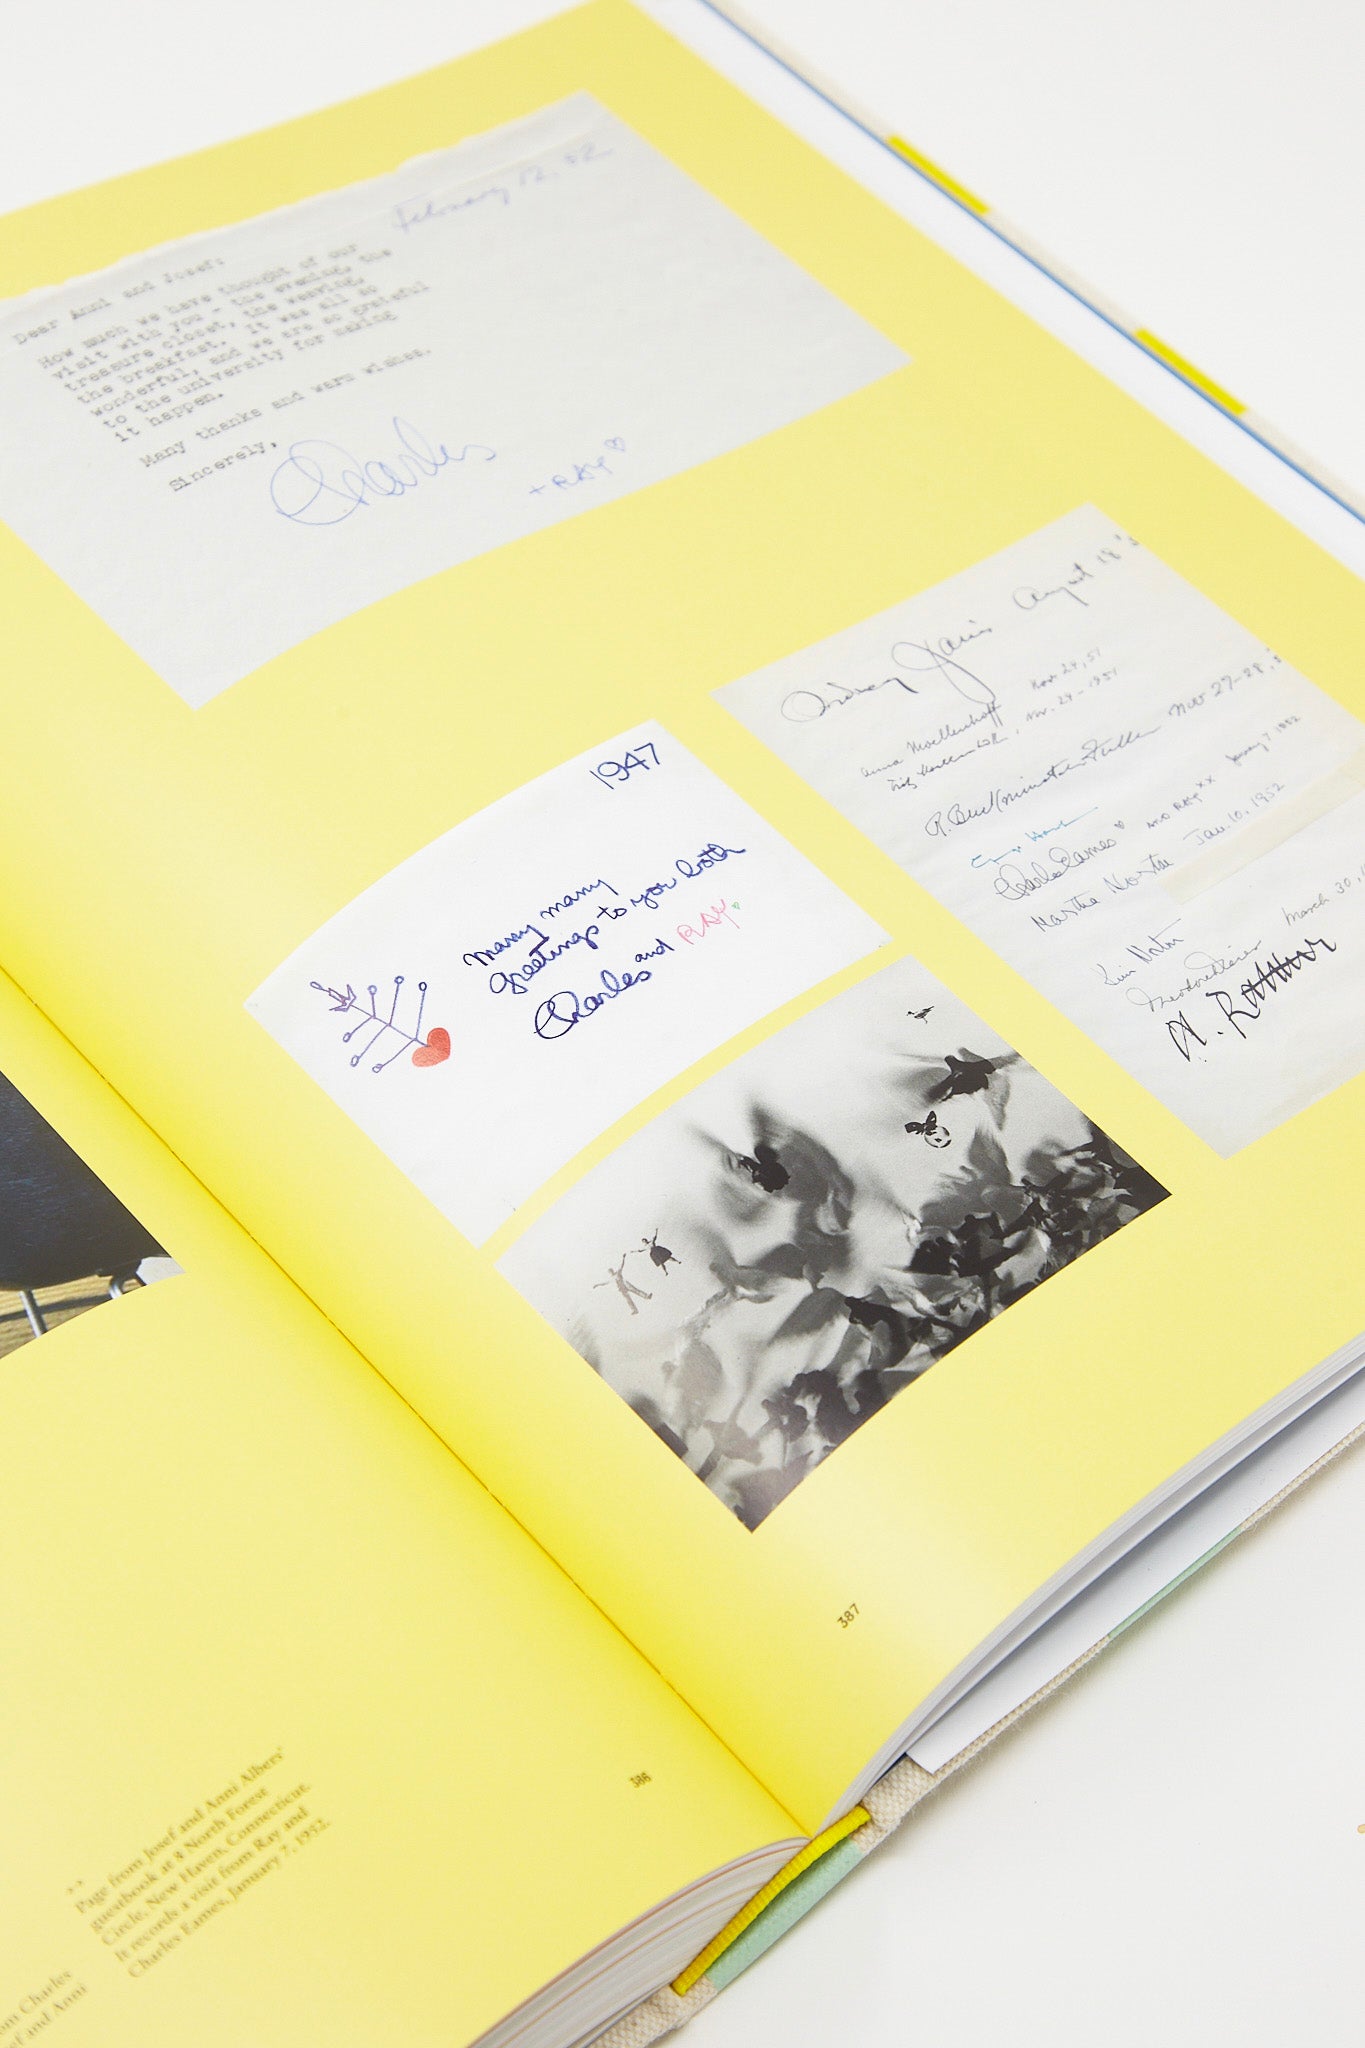 An open book with a collection of photos and notes by Anni & Josef Albers.